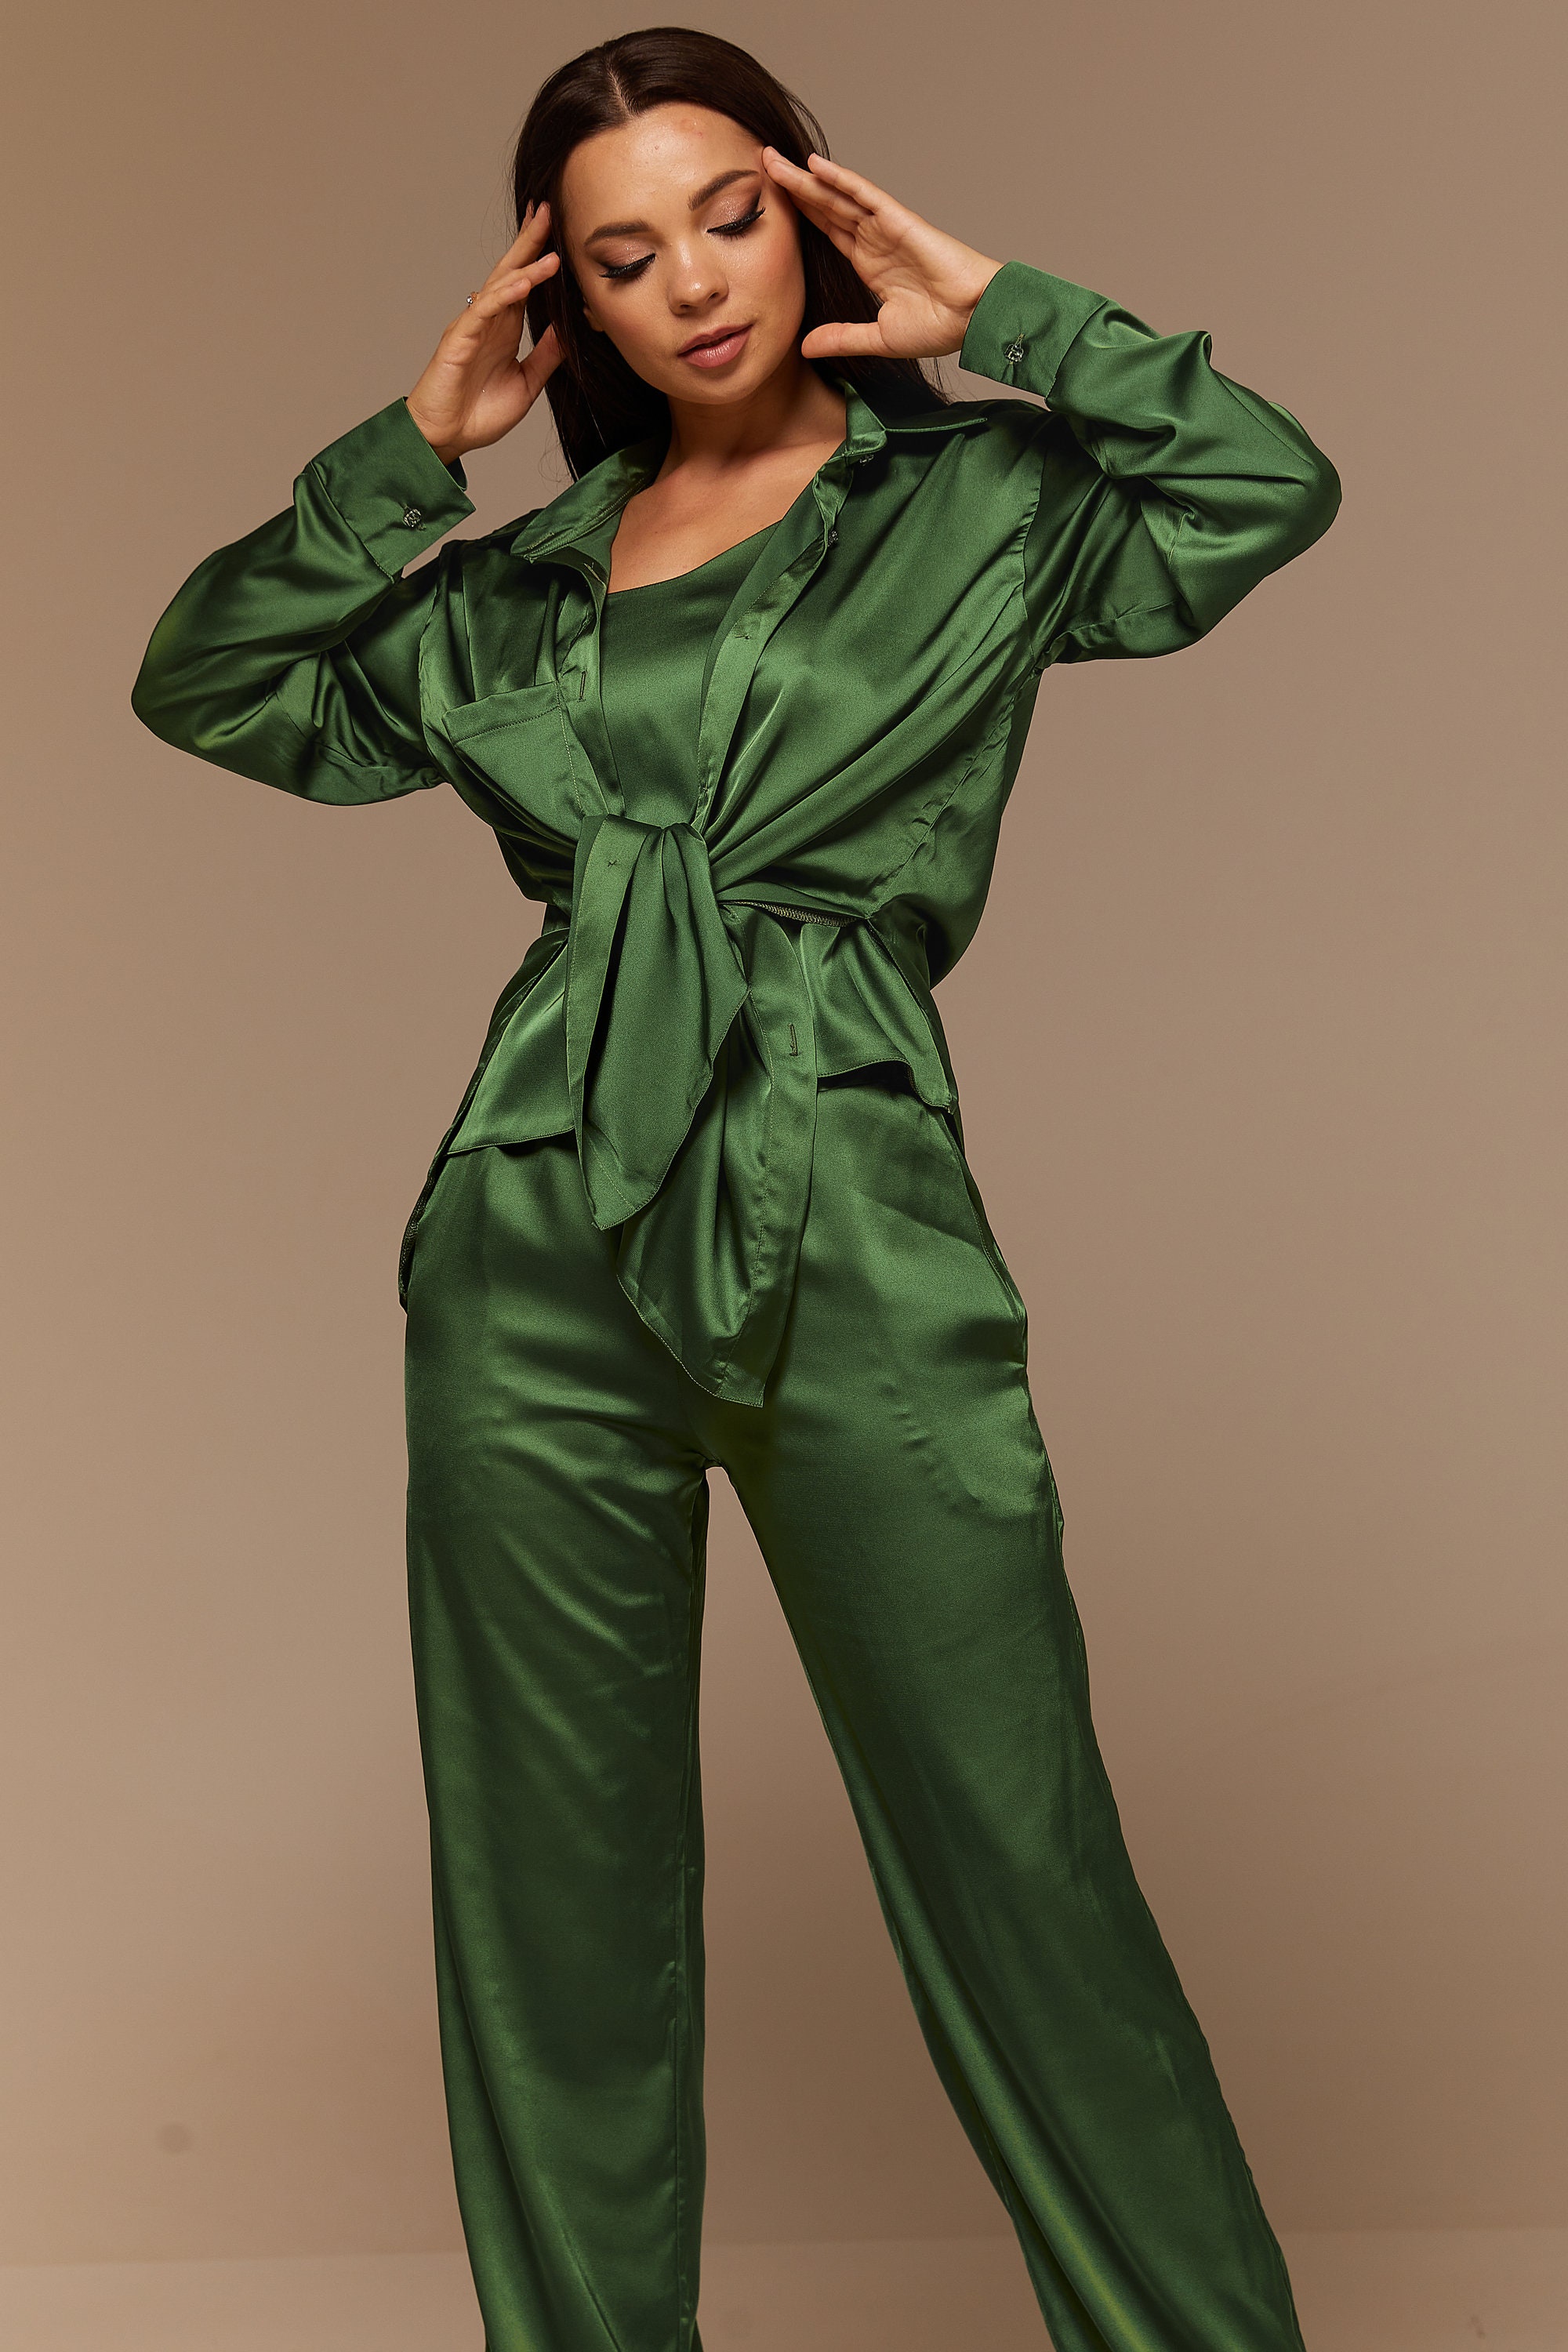 Moss Green Silk Pant Suit for Women Satin Three Piece Summer | Etsy